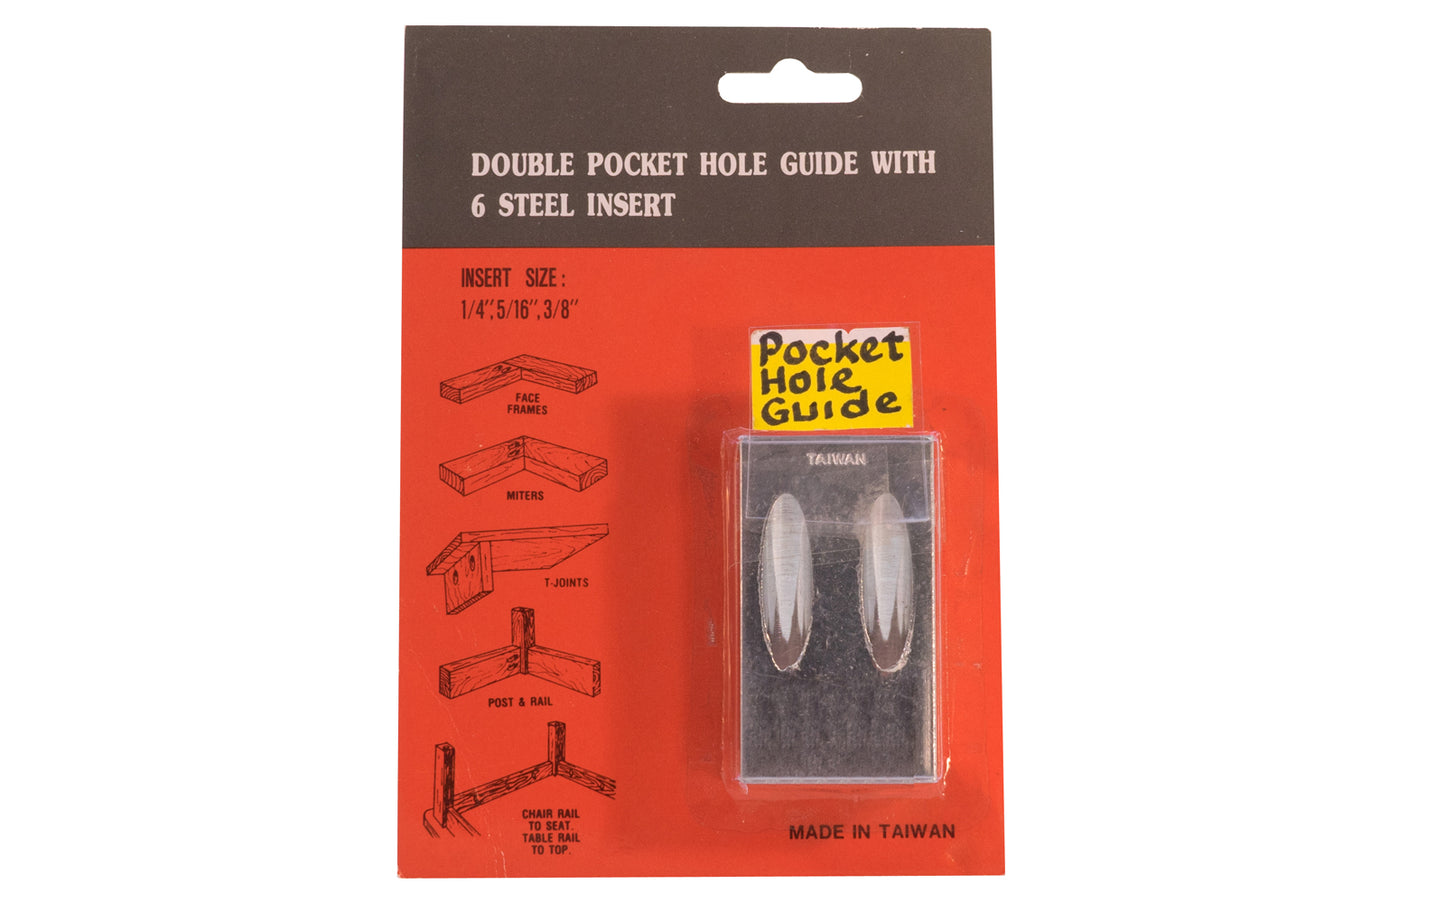 Double Pocket Hole Guide with 6 Steel Insert. Great for Face Frames, Miters, T-Joints, Post & Rail, etc. Insert Size: 1/4", 5/16", 3/8". 744391115744. 800-2210